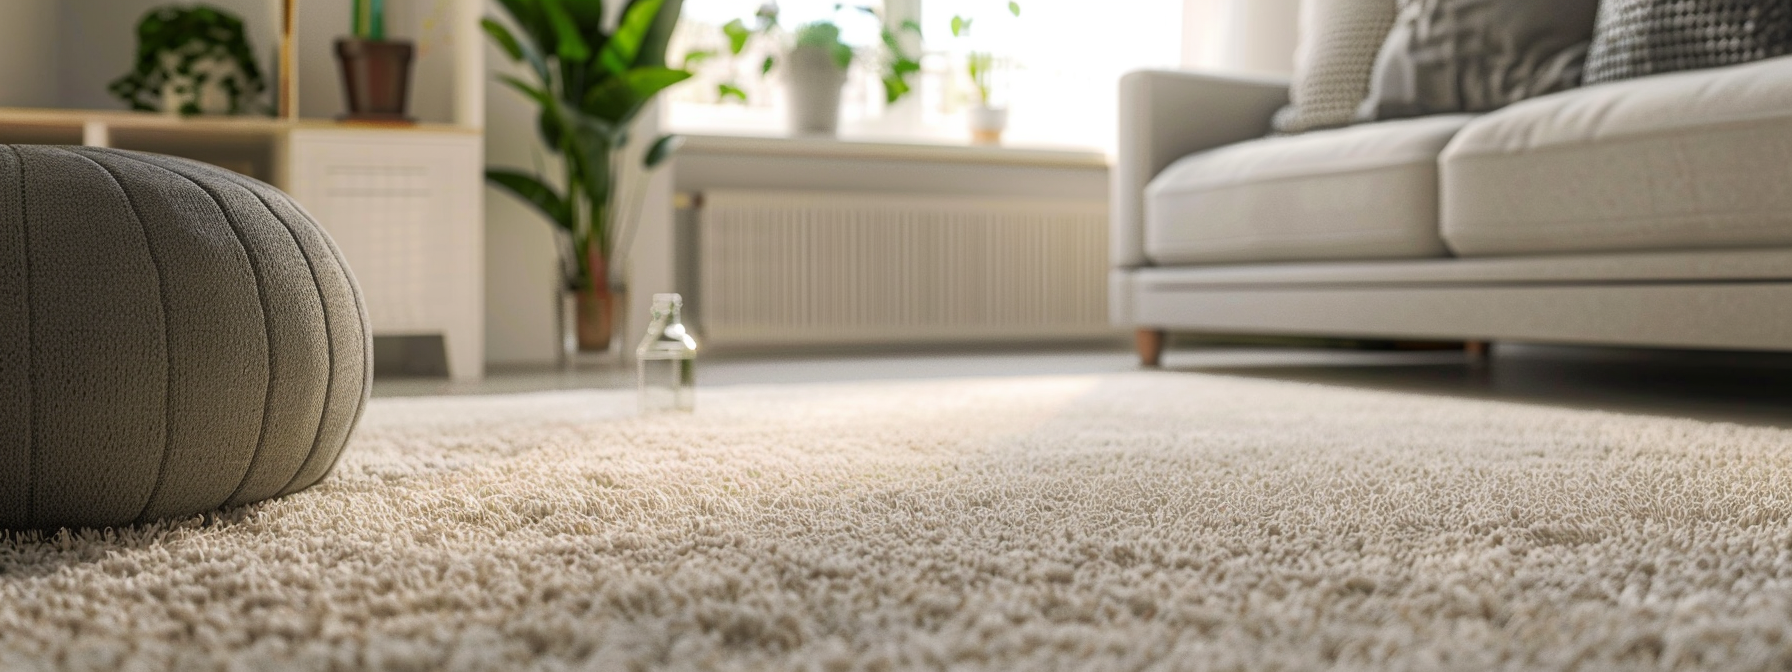 Preventative Carpet Care: Protecting Your Investment